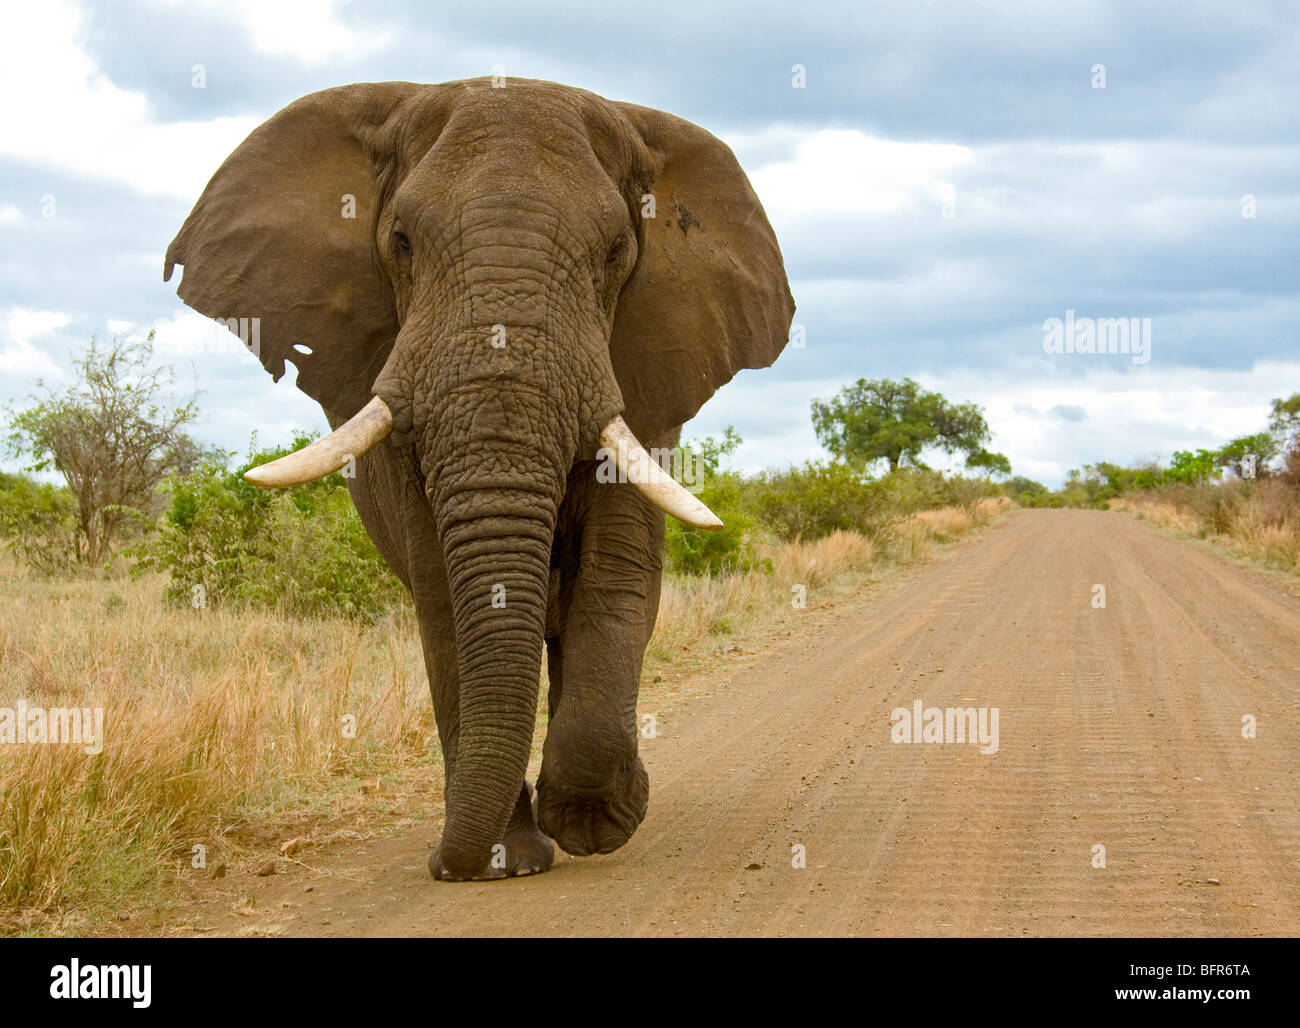 Low angle view of a an Elephant walking on a dusty road Stock Photo